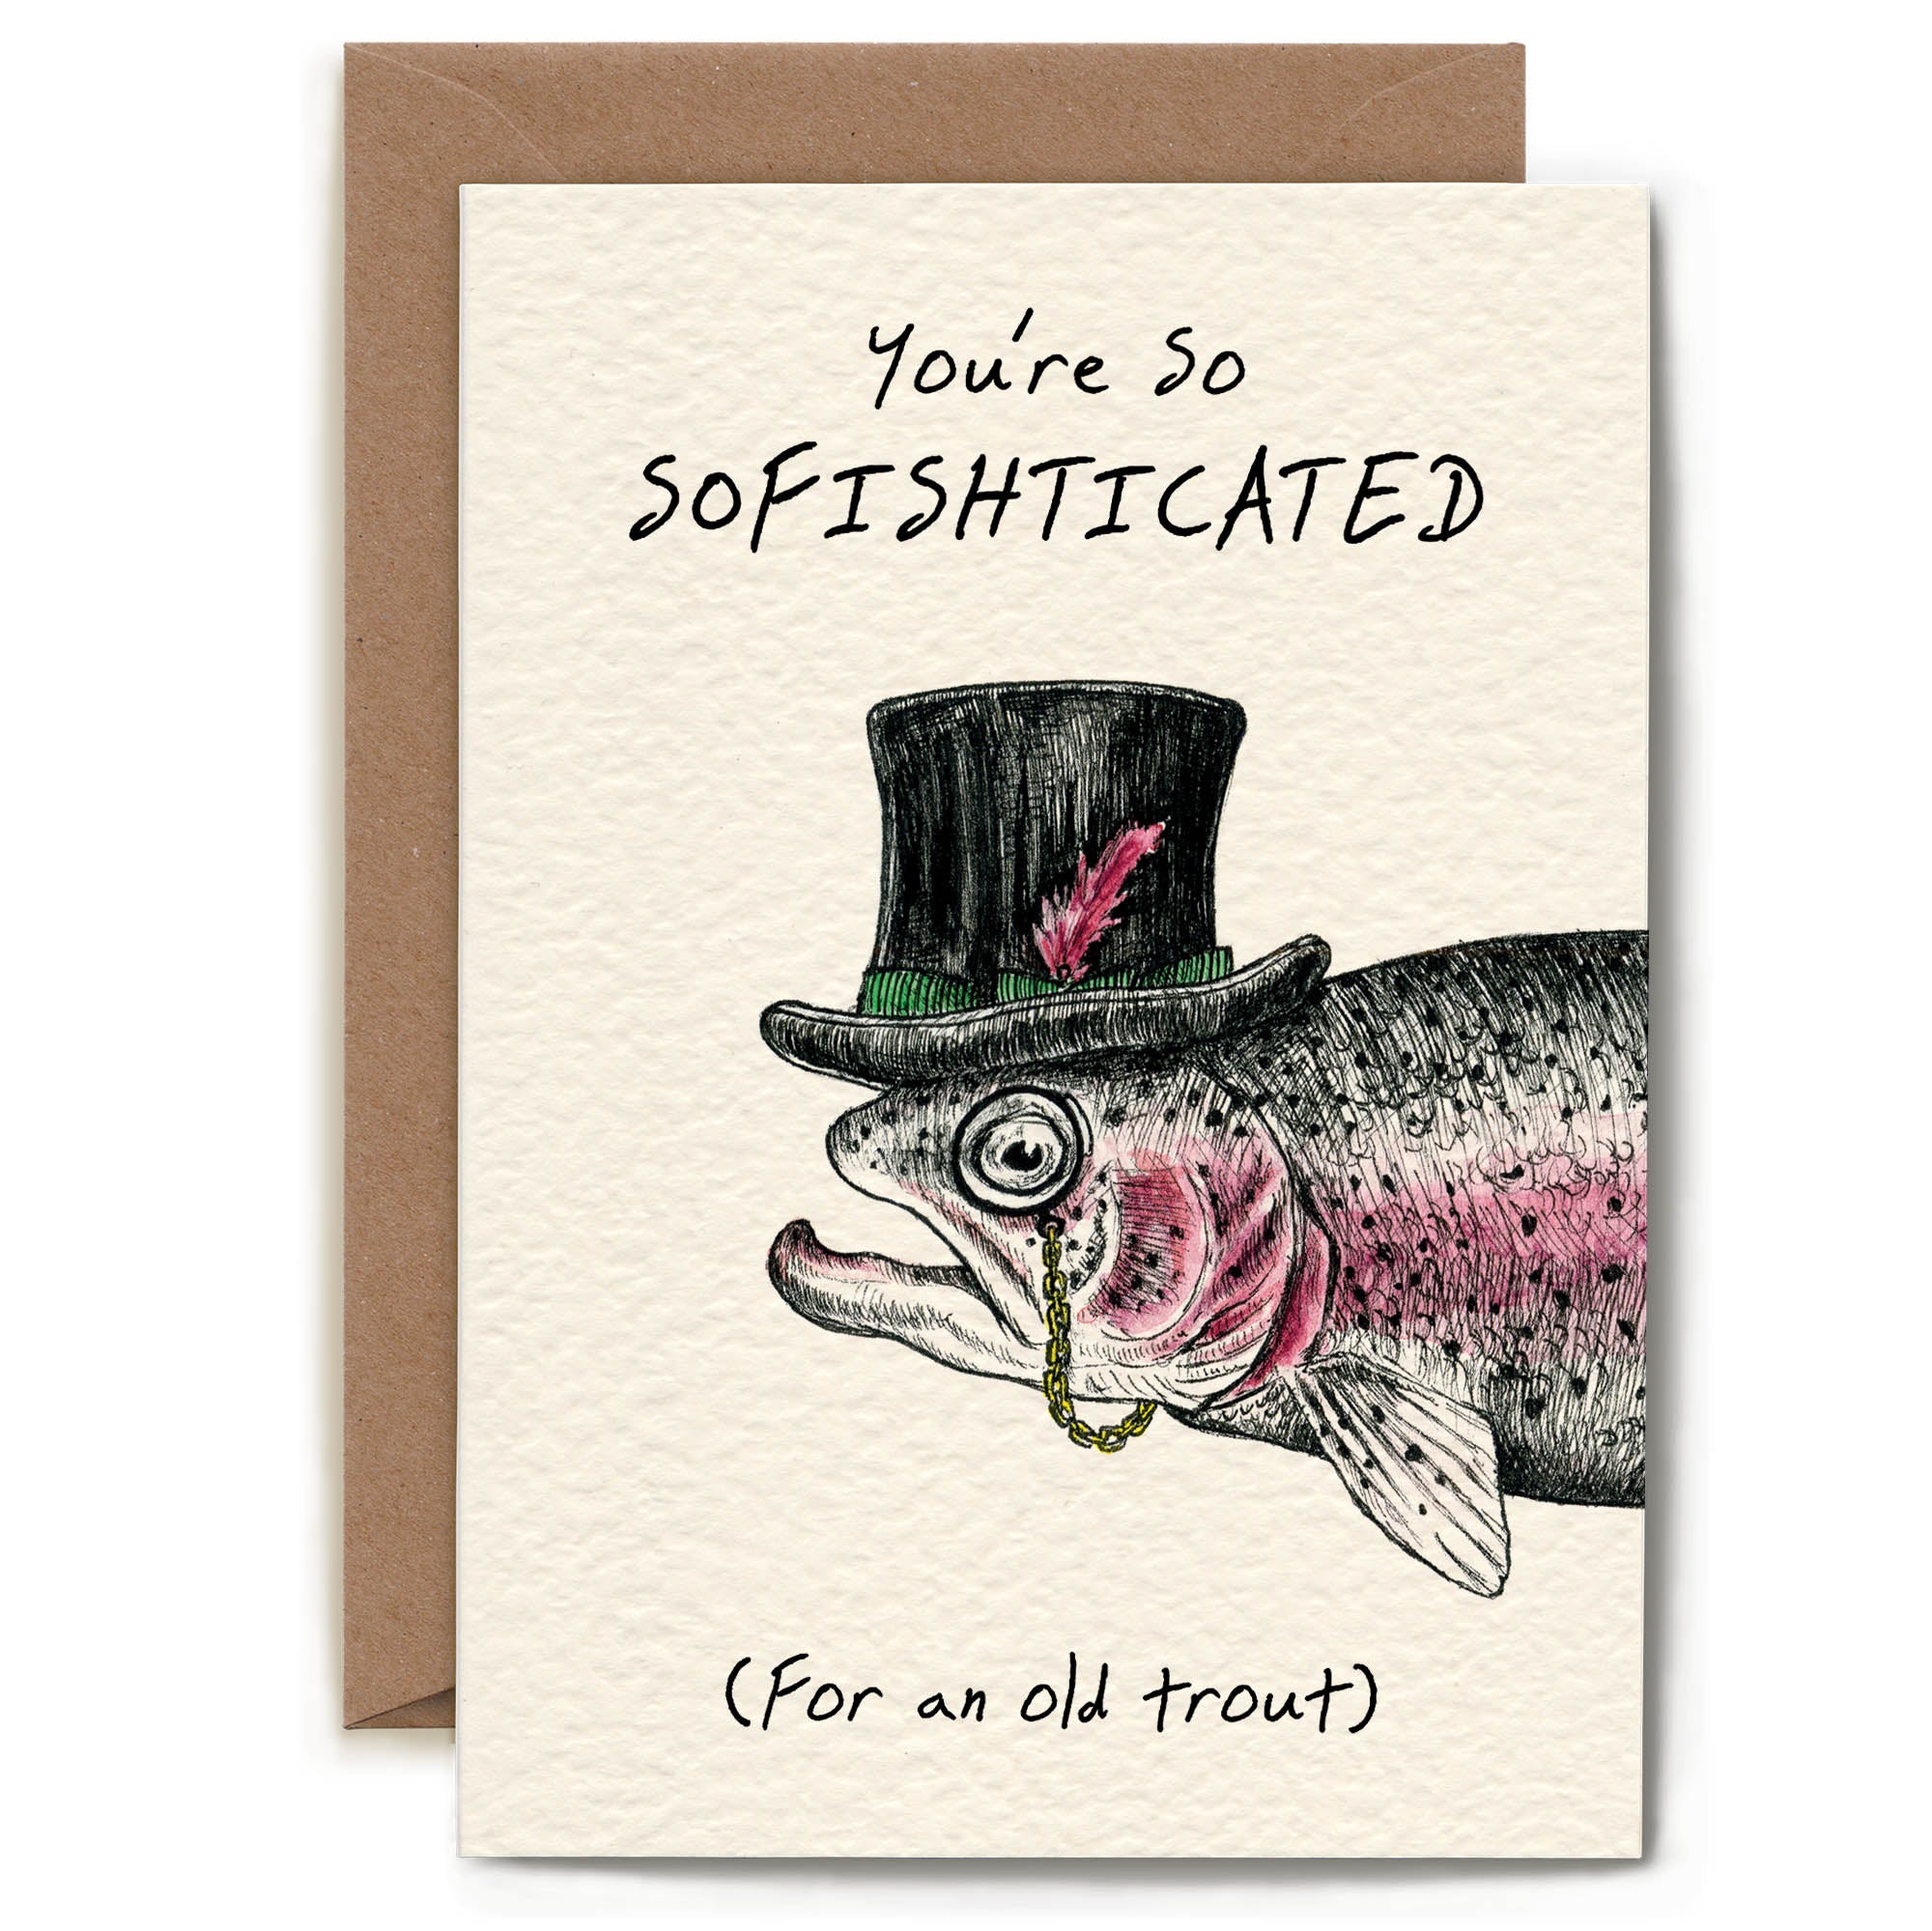 Sofishticated Card by Bewilderbeest